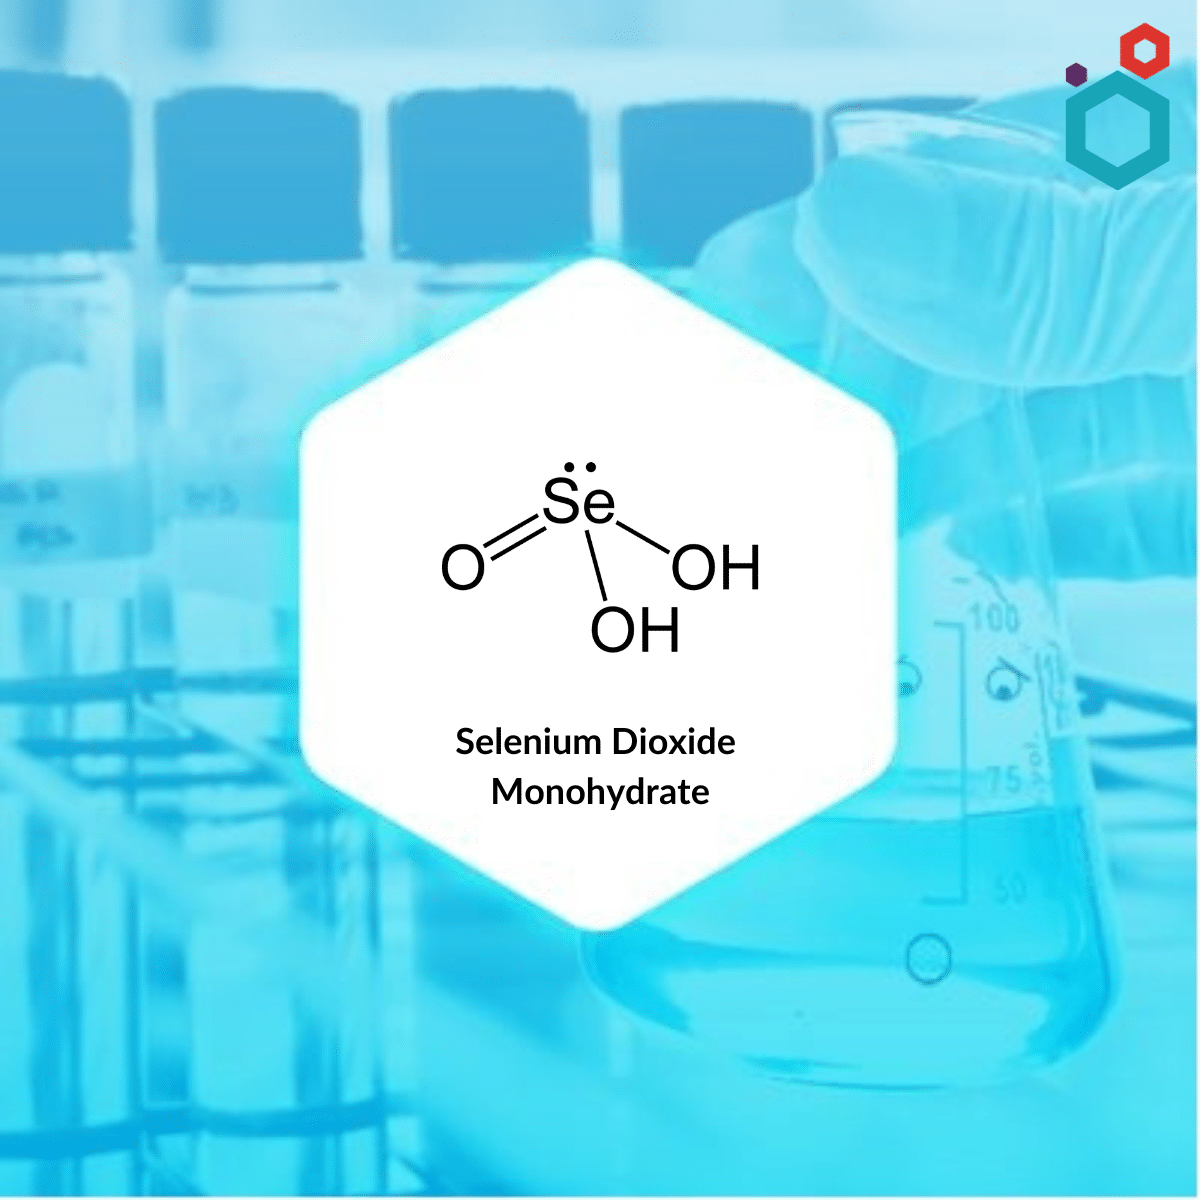 Selenium Dioxide Monohydrate Chemical Structure